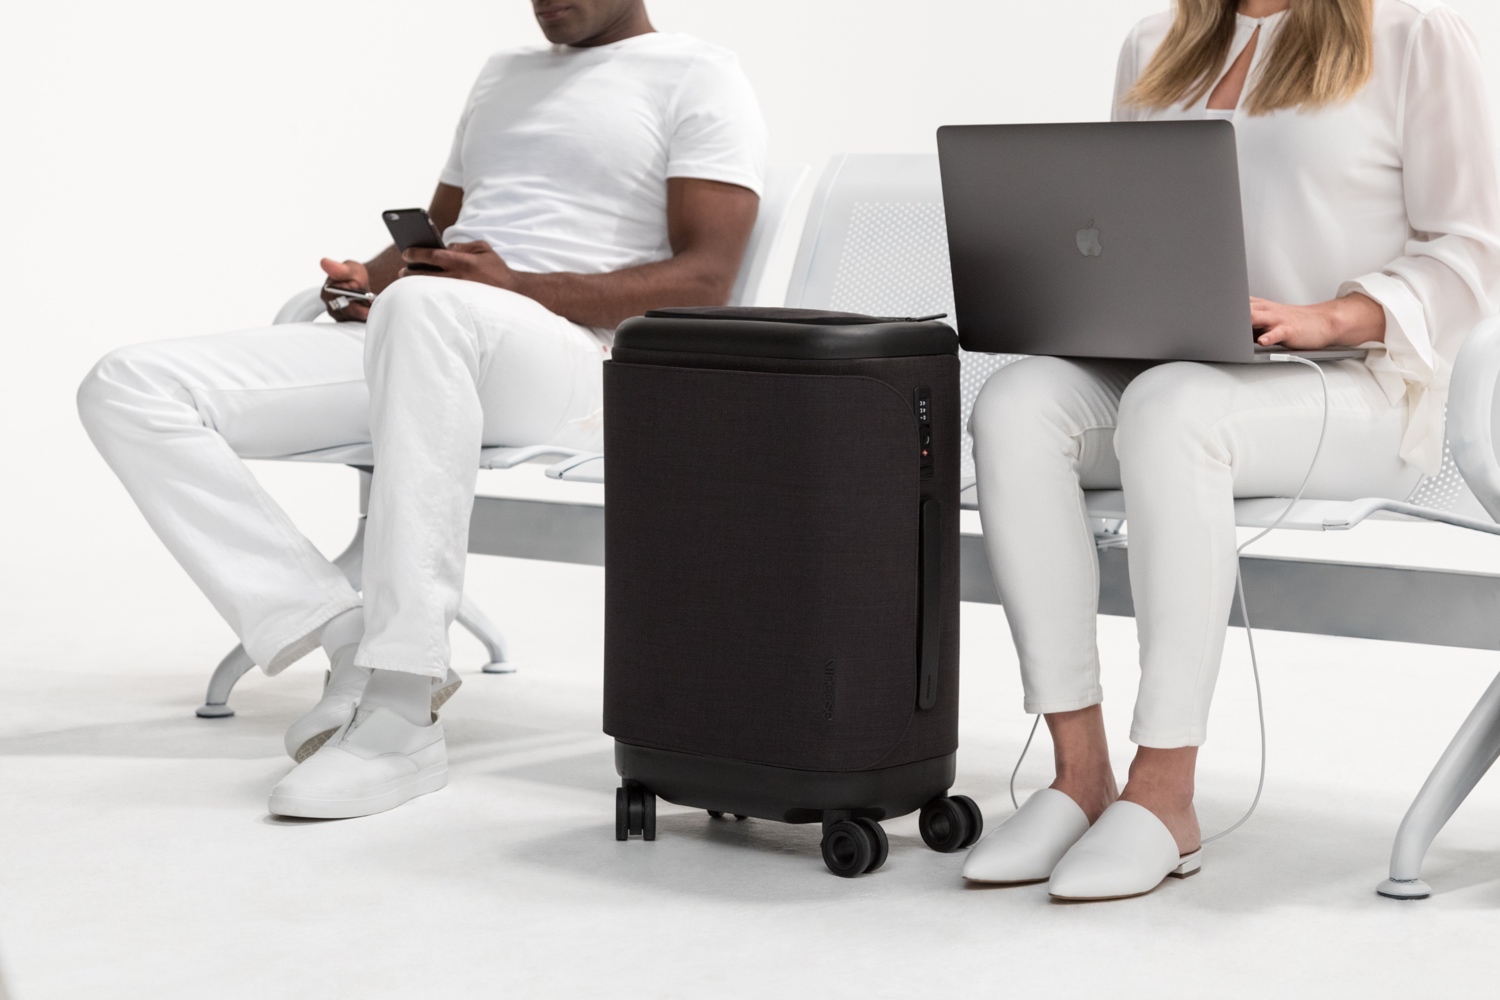 incase proconnected 4 wheel hubless roller smart luggage blends high design with large capacity battery lifestyle 0300